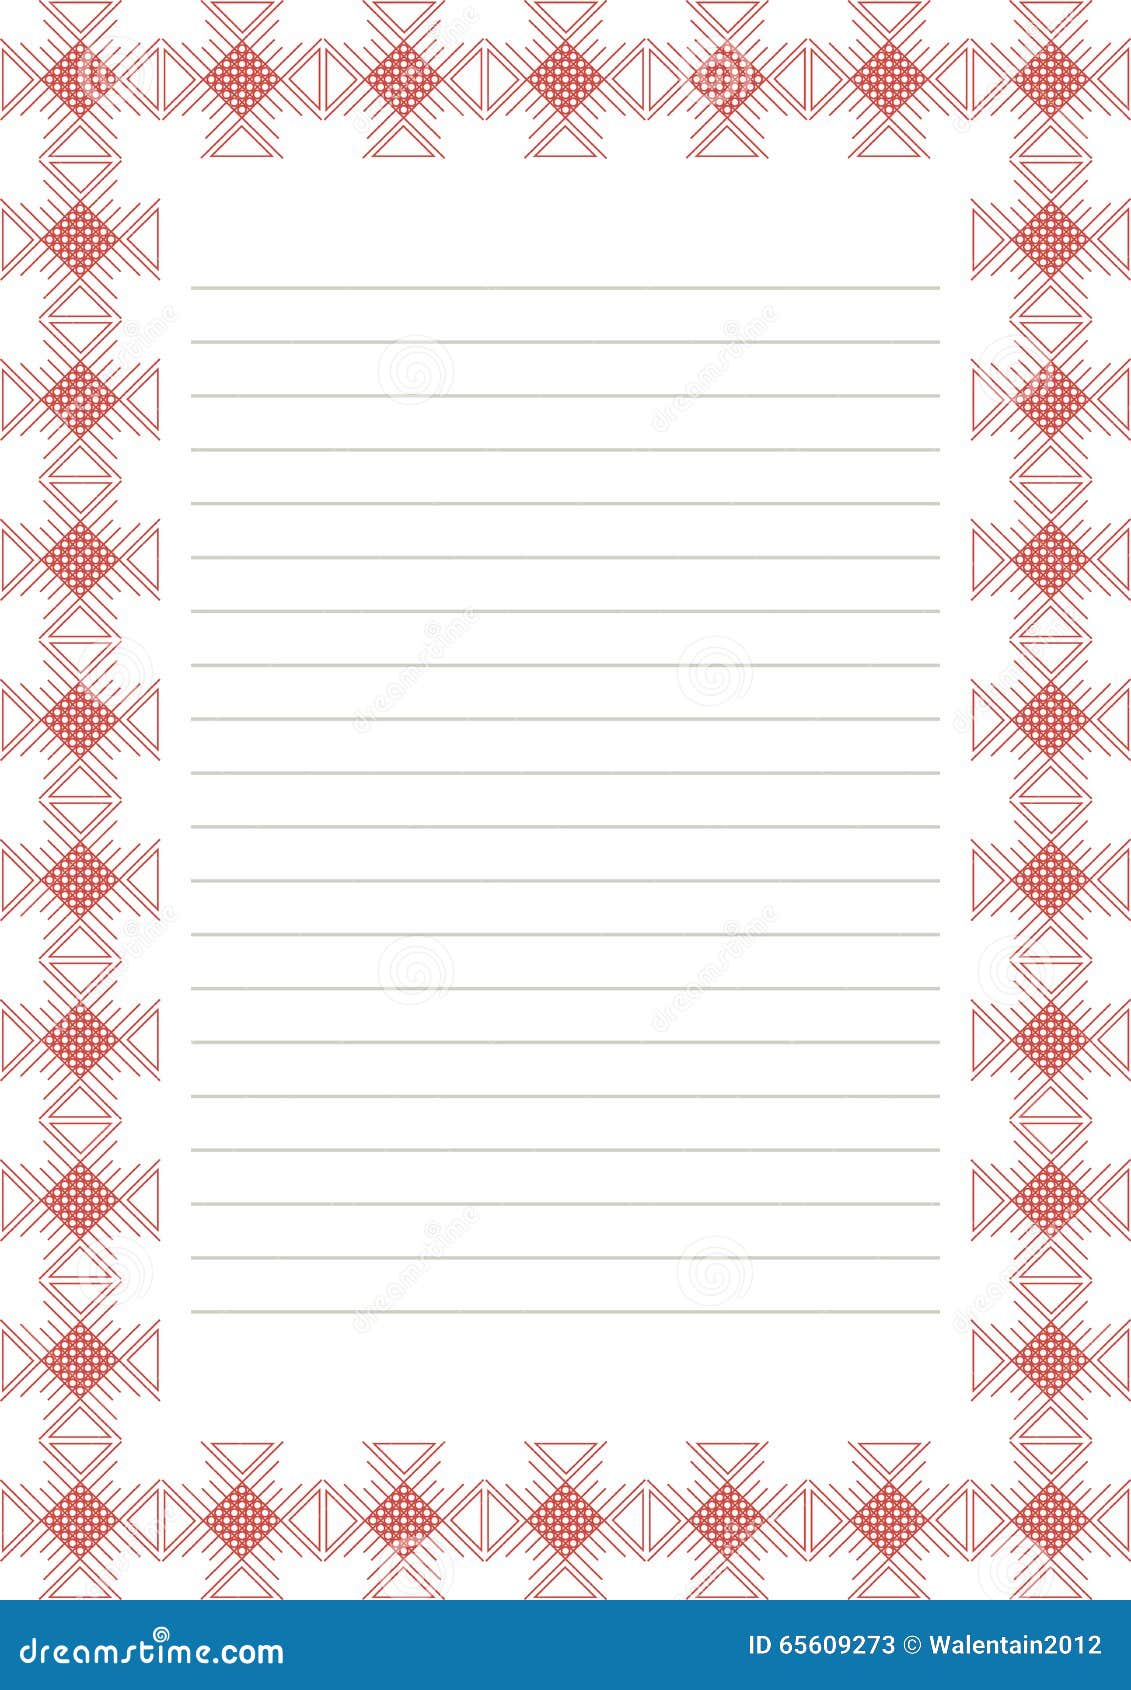 30 Best Images Free Printable Decorative Paper Borders / Writing Paper With Borders Free Printables | *Stationery ...